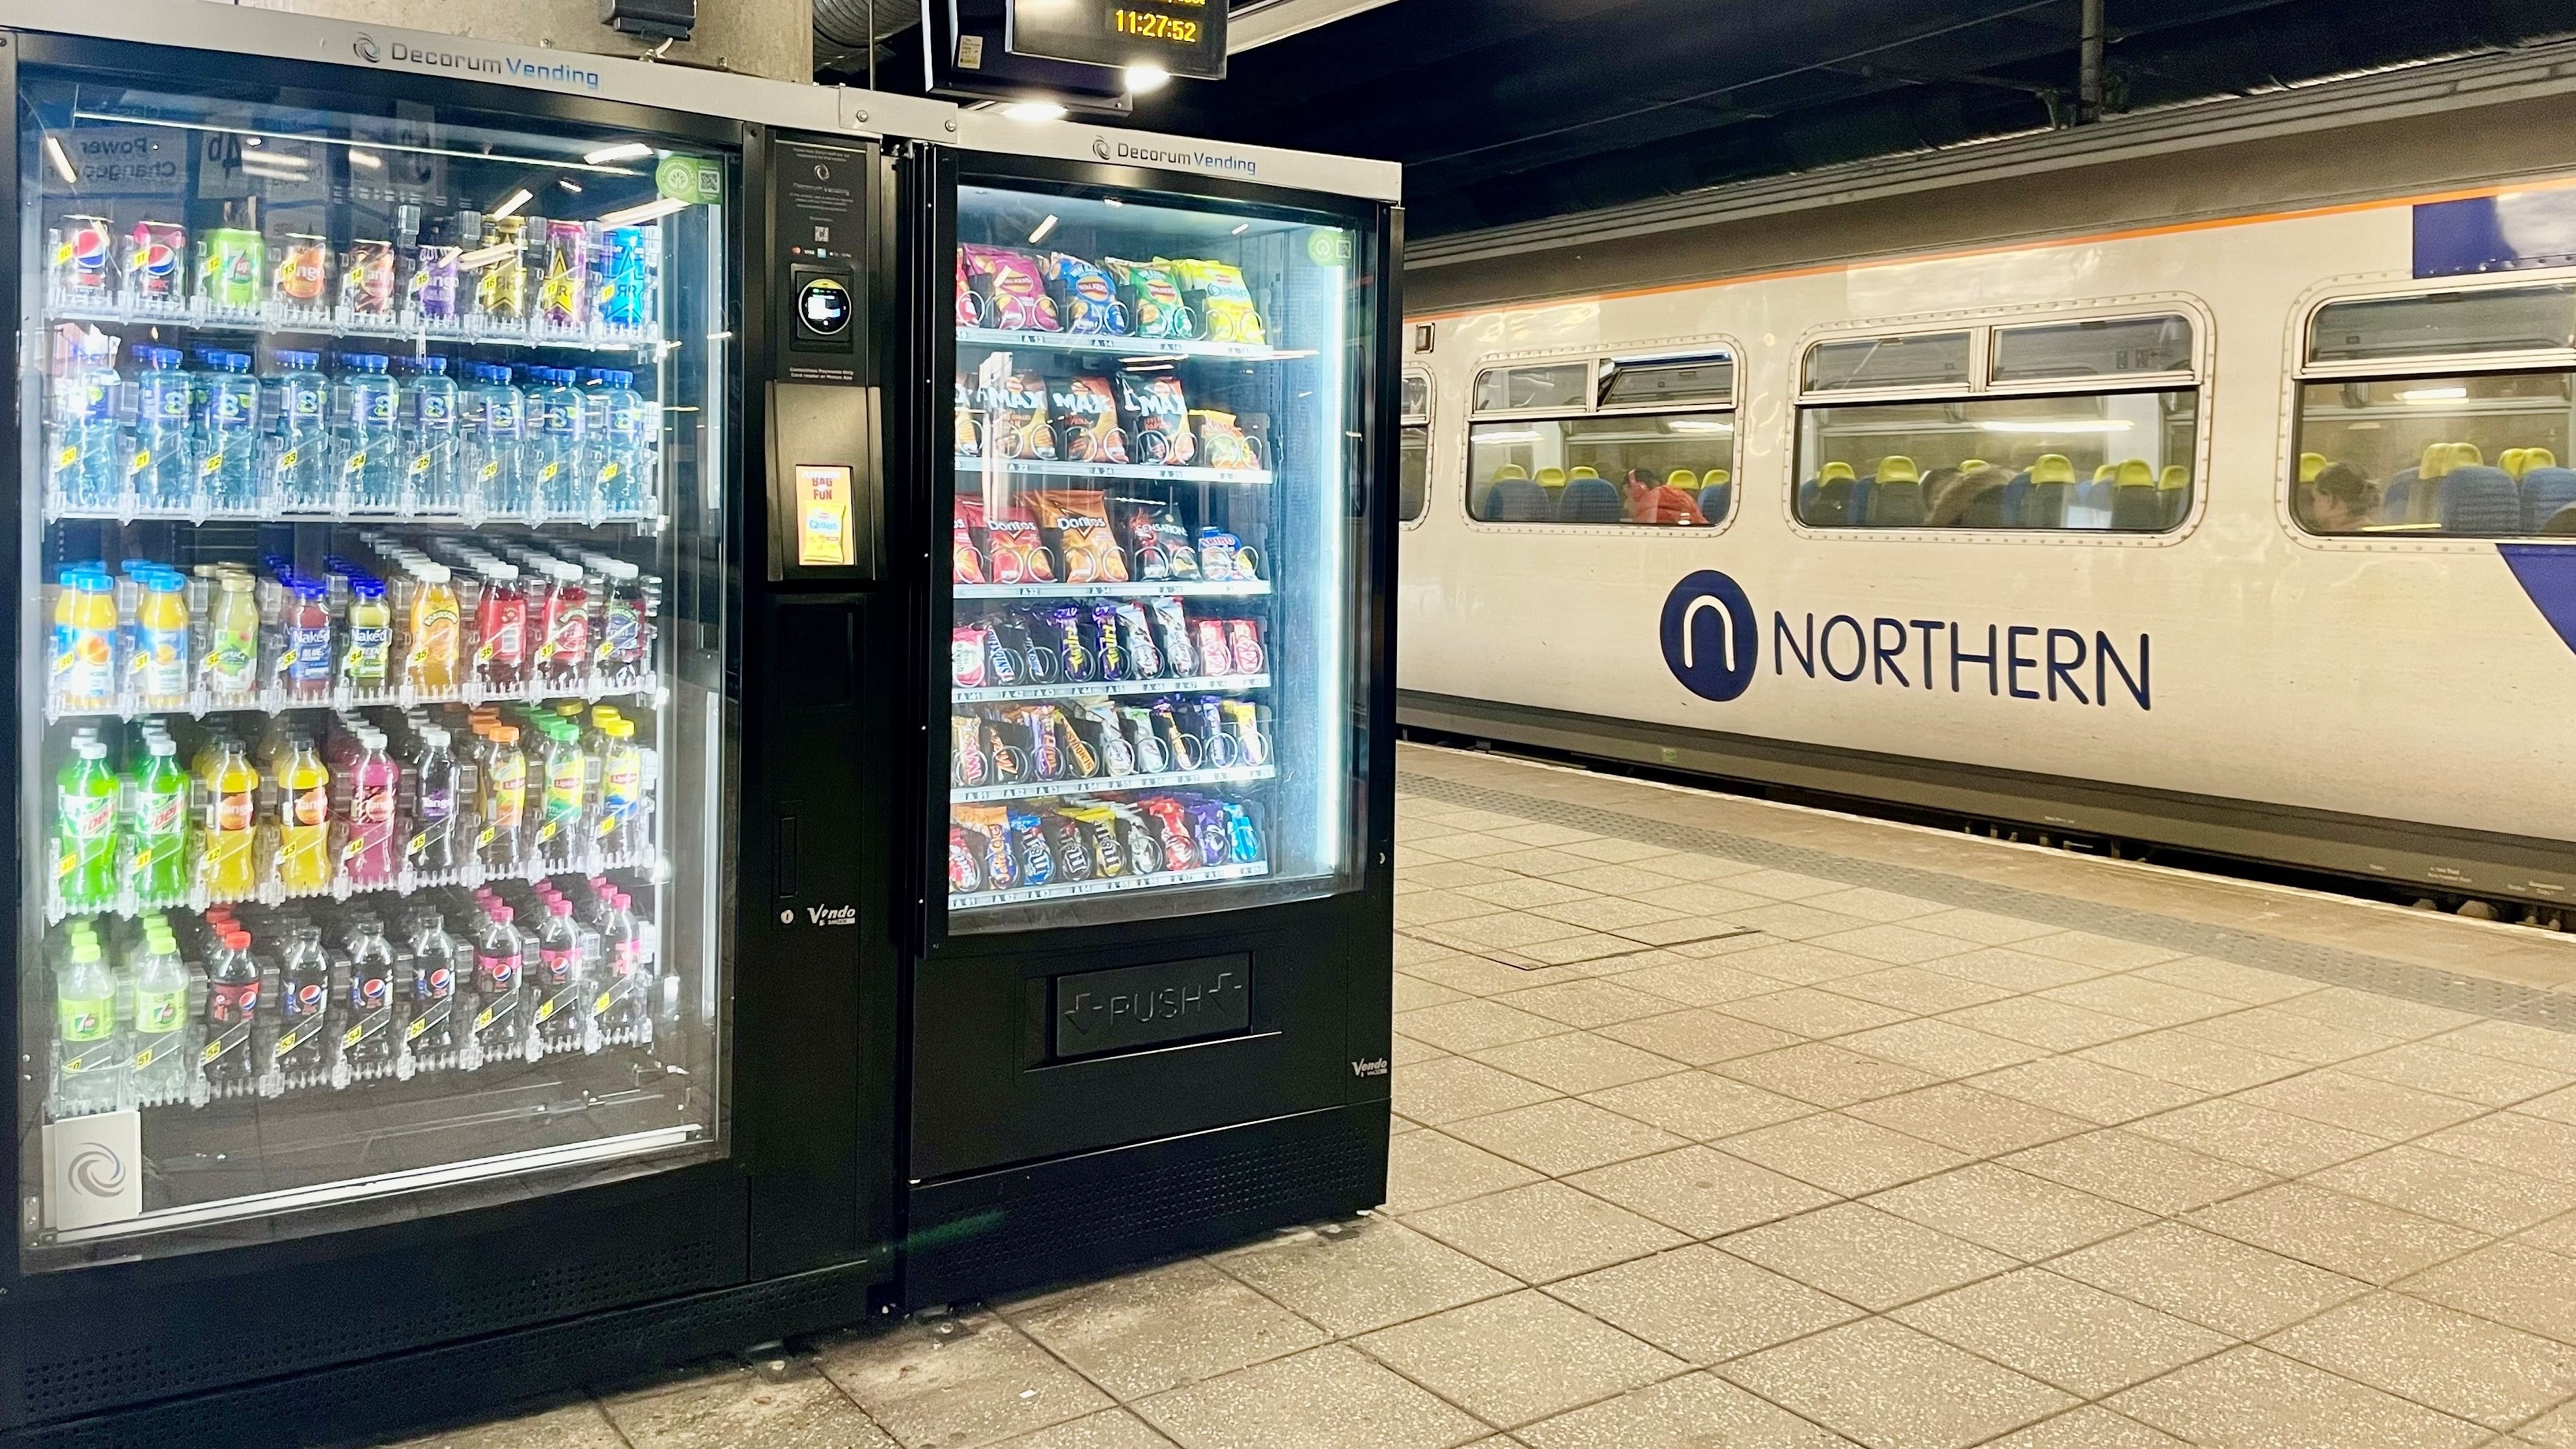 Image shows vending machine on platform with Northern service-2